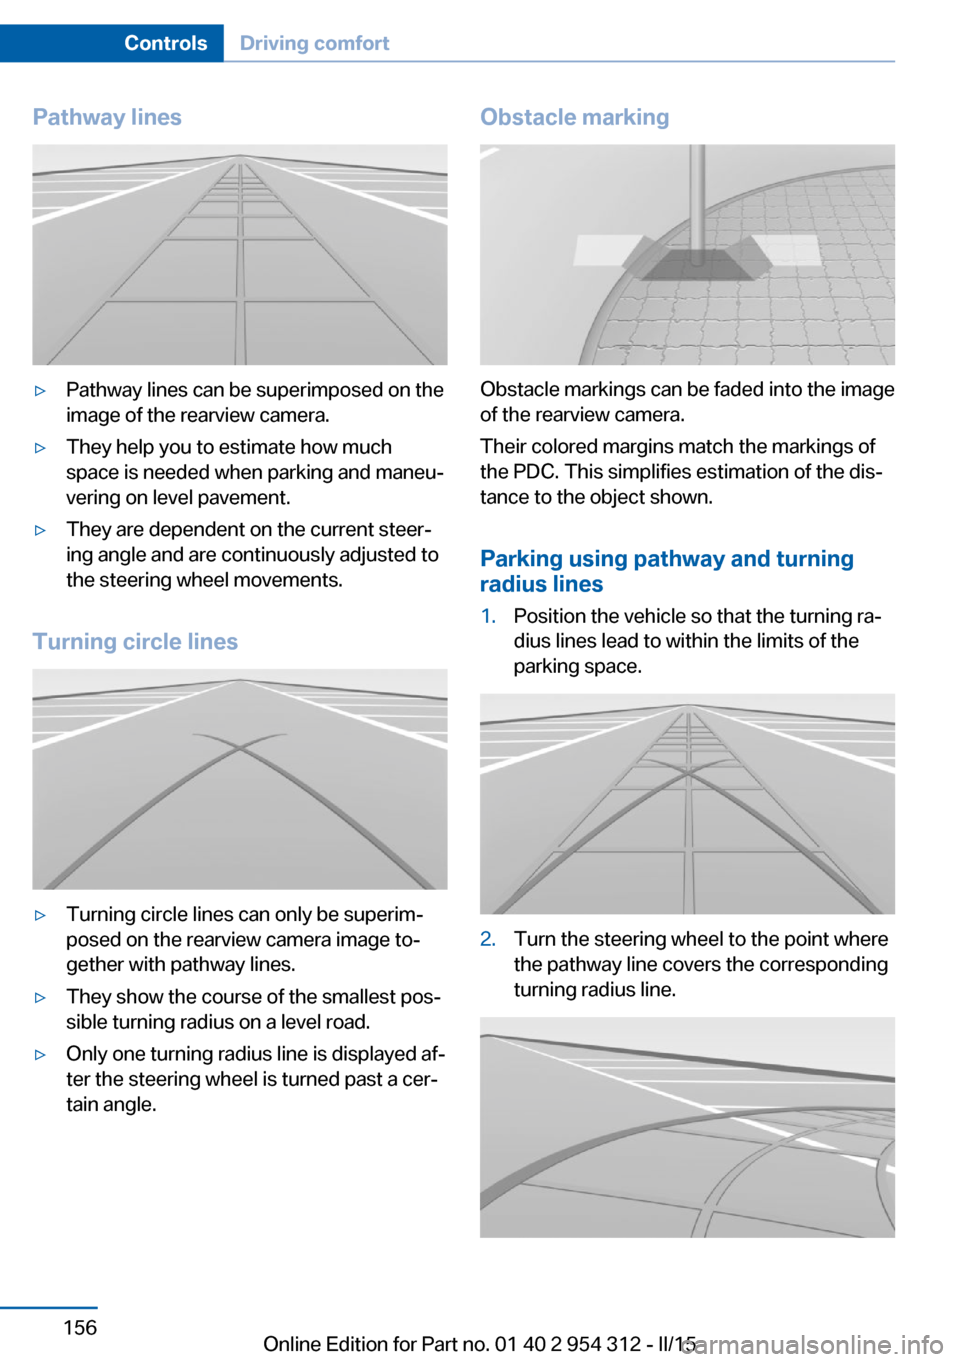 BMW 5 SERIES 2015 F10 Owners Guide Pathway lines▷Pathway lines can be superimposed on the
image of the rearview camera.▷They help you to estimate how much
space is needed when parking and maneu‐
vering on level pavement.▷They a